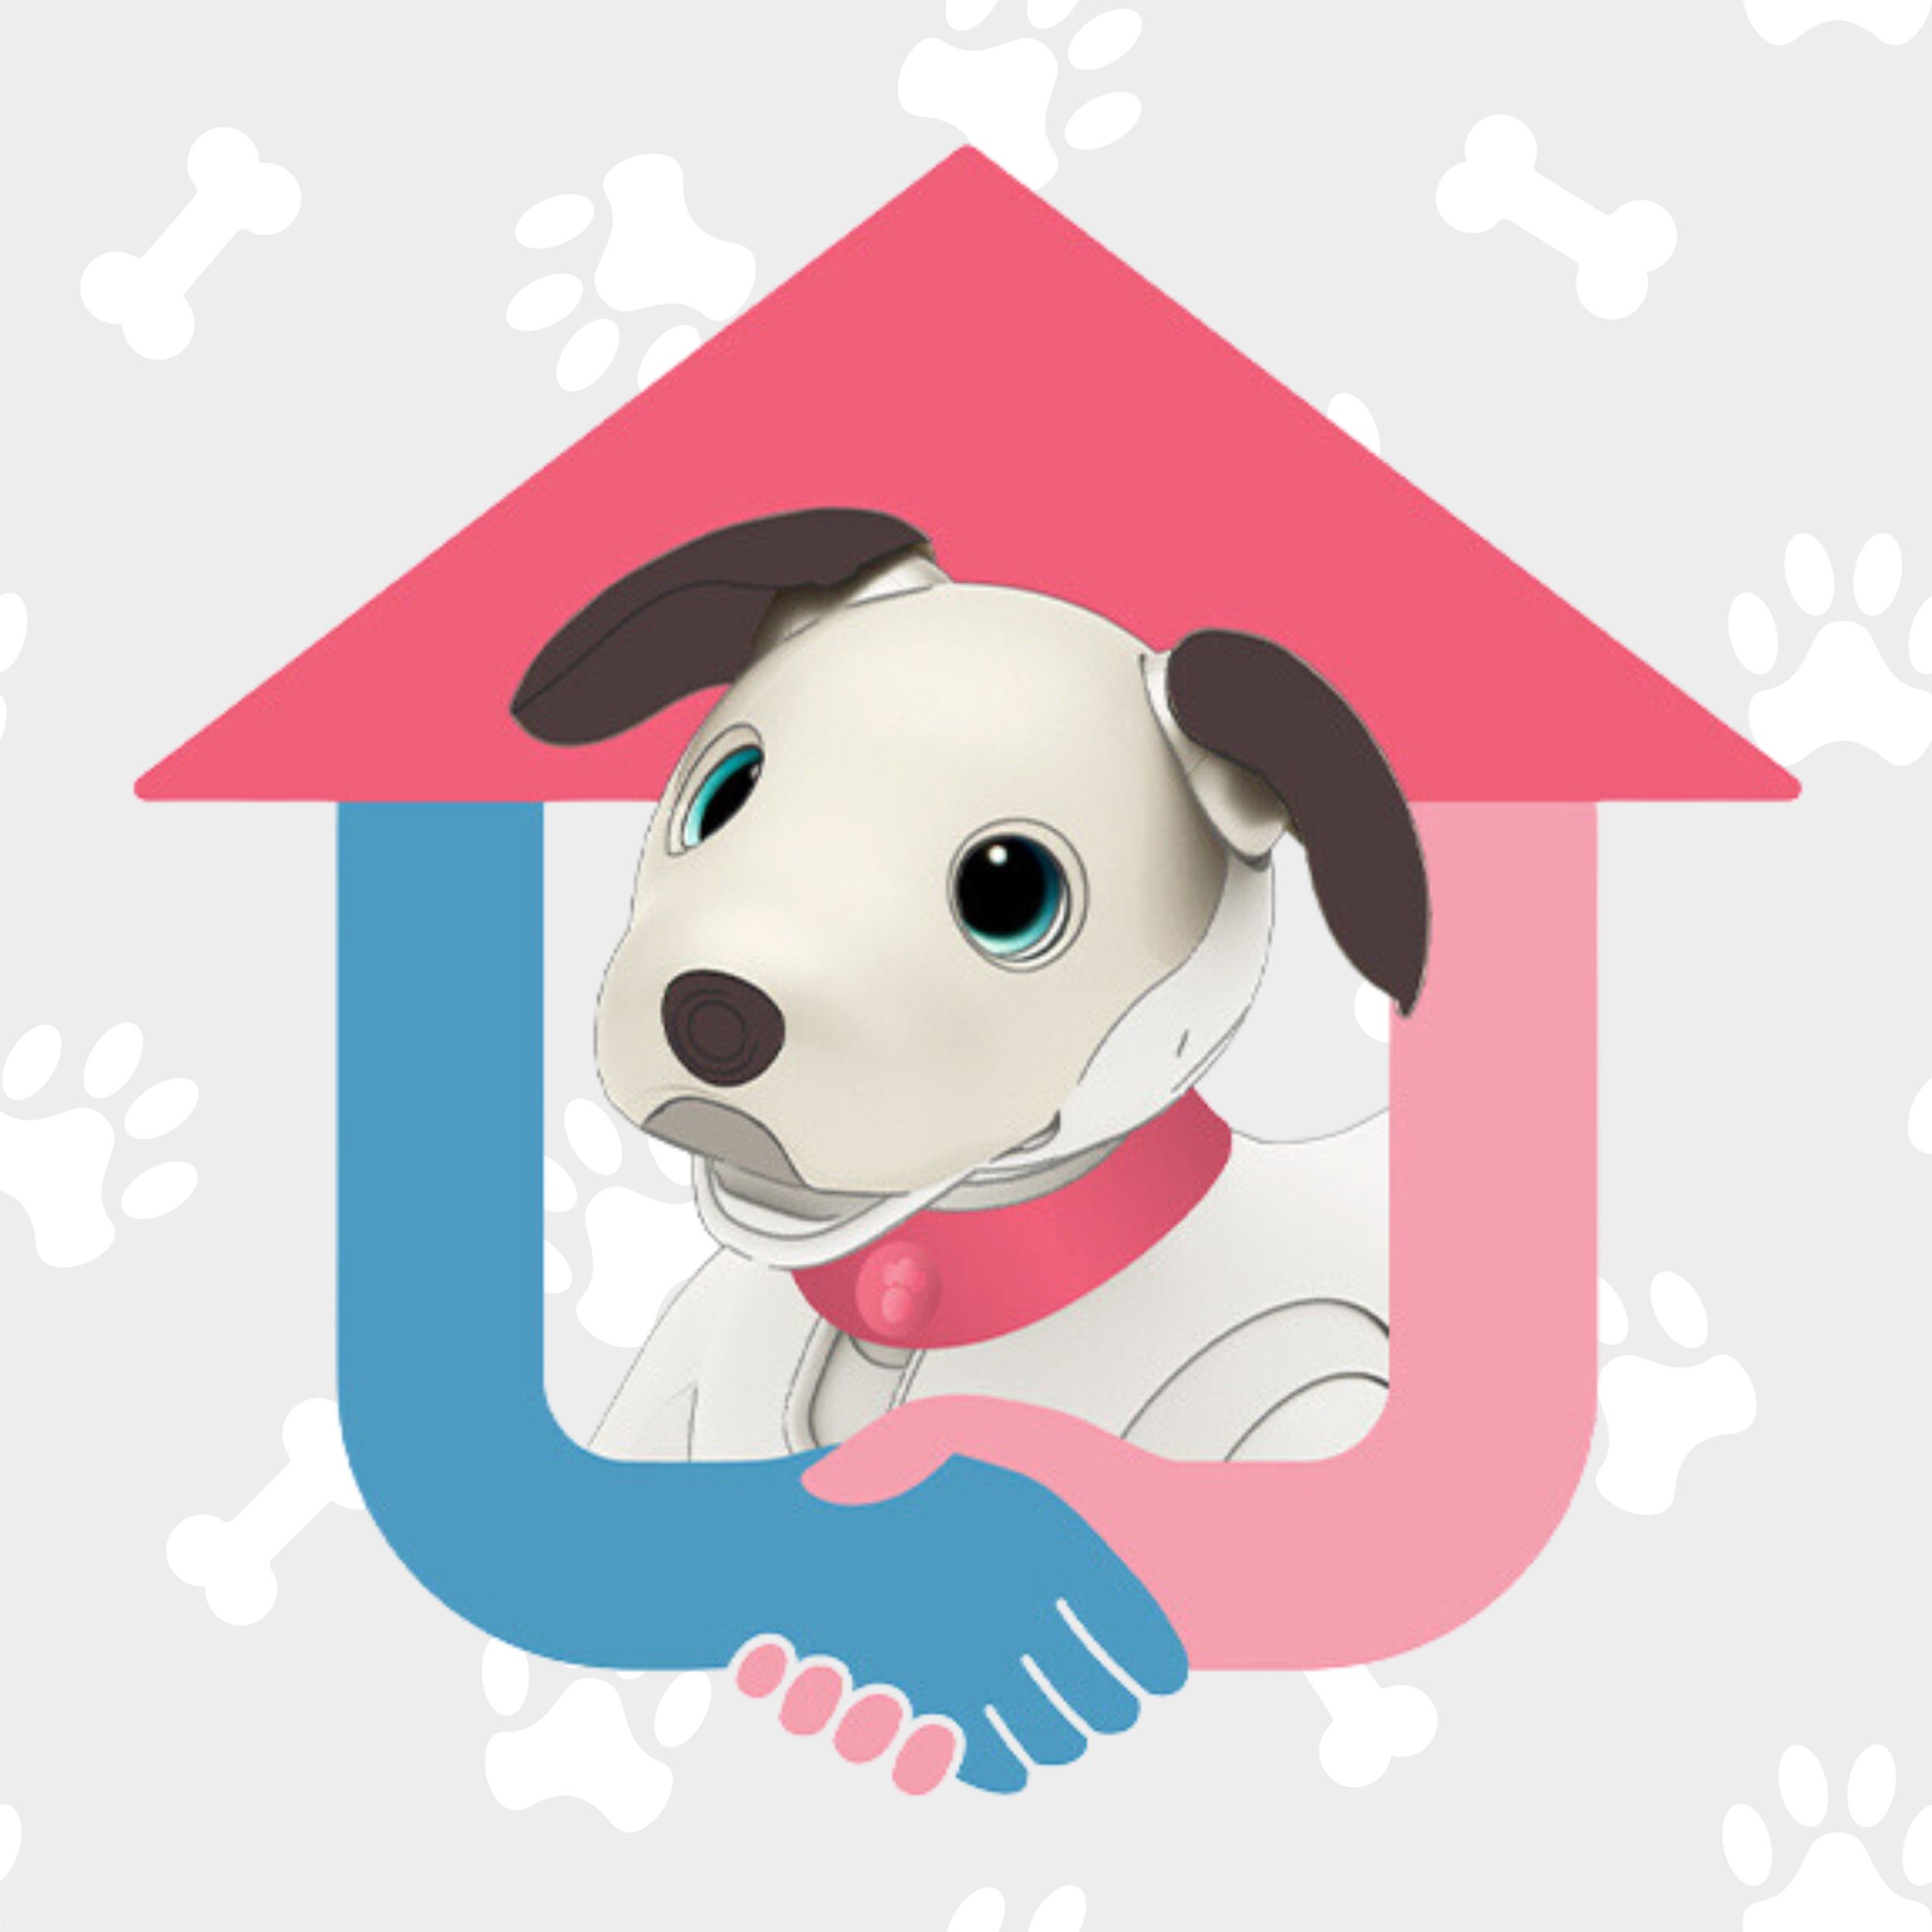 The Sony Aibo robot dog in a logo for a new ‘foster care’ donation program.